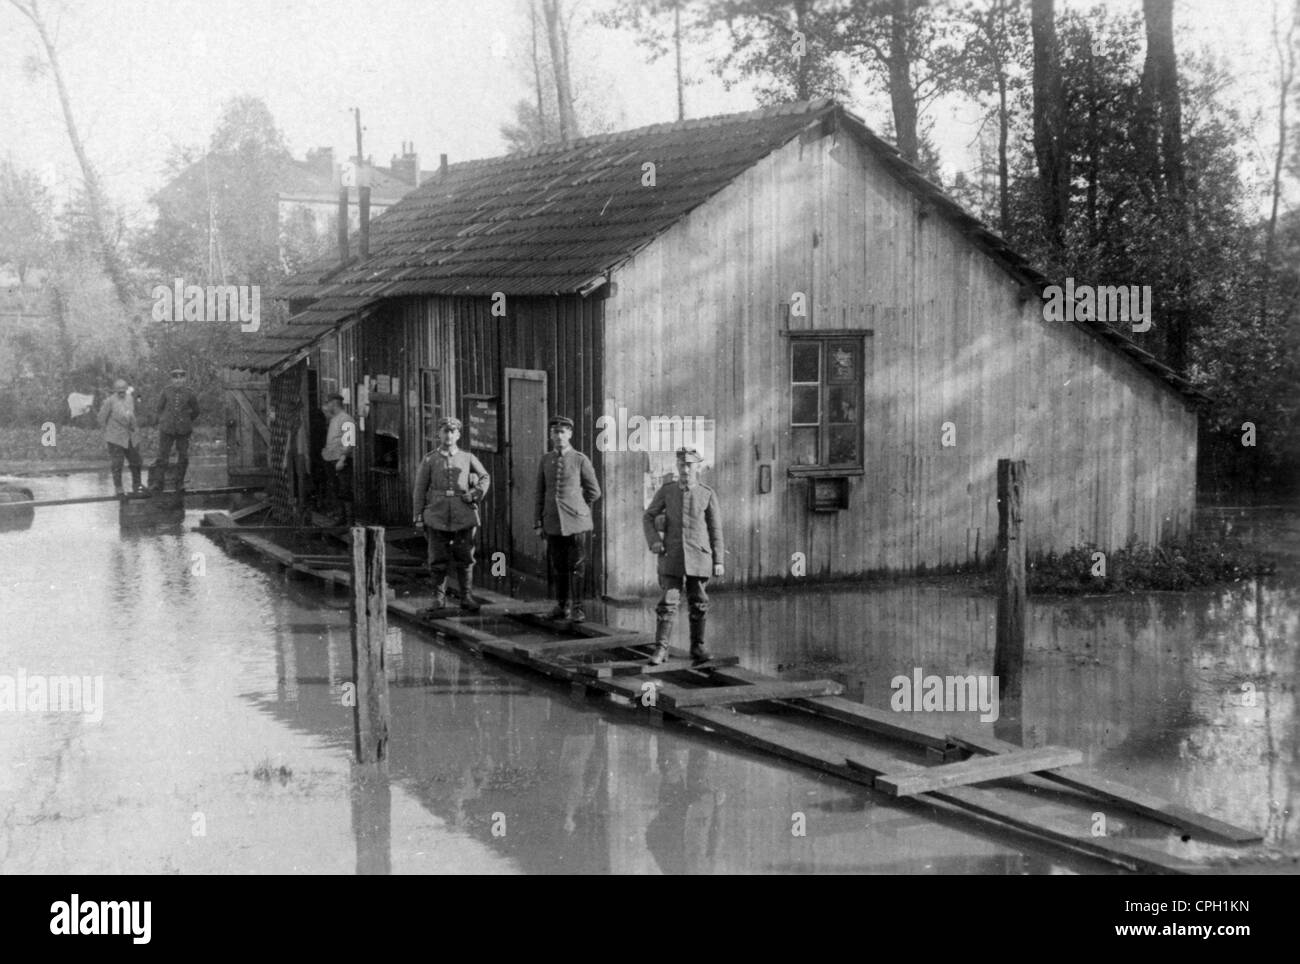 events, First World War / WWI, back area, Western Front, soldiers of a German railway unit in front of their kitchen barrack during a flood, France, 20.10.1916, Additional-Rights-Clearences-Not Available Stock Photo